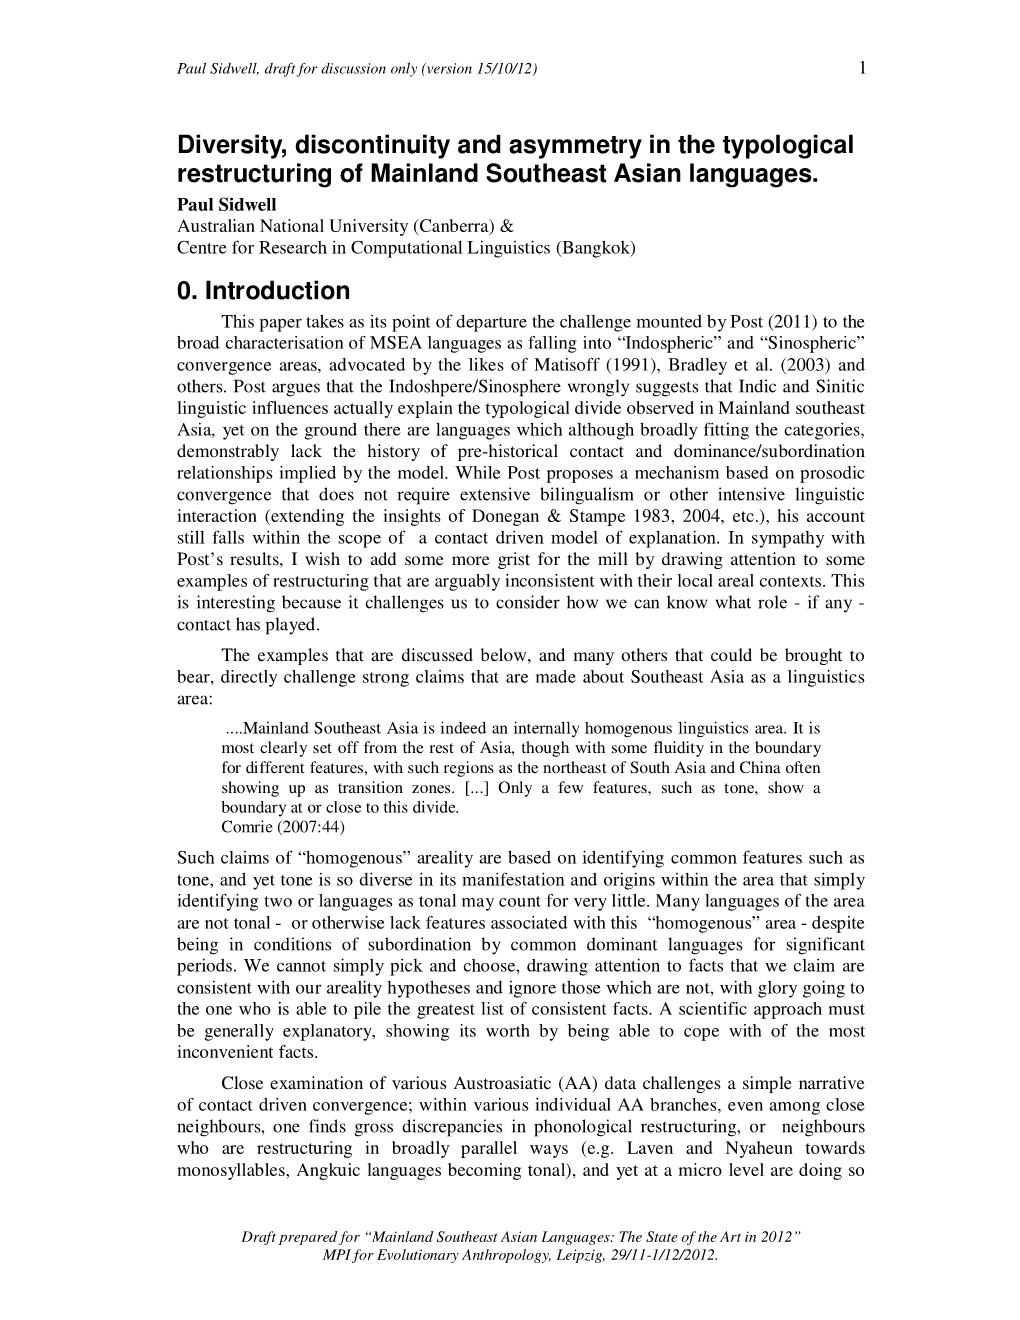 Diversity, Discontinuity and Asymmetry in the Typological Restructuring of Mainland Southeast Asian Languages